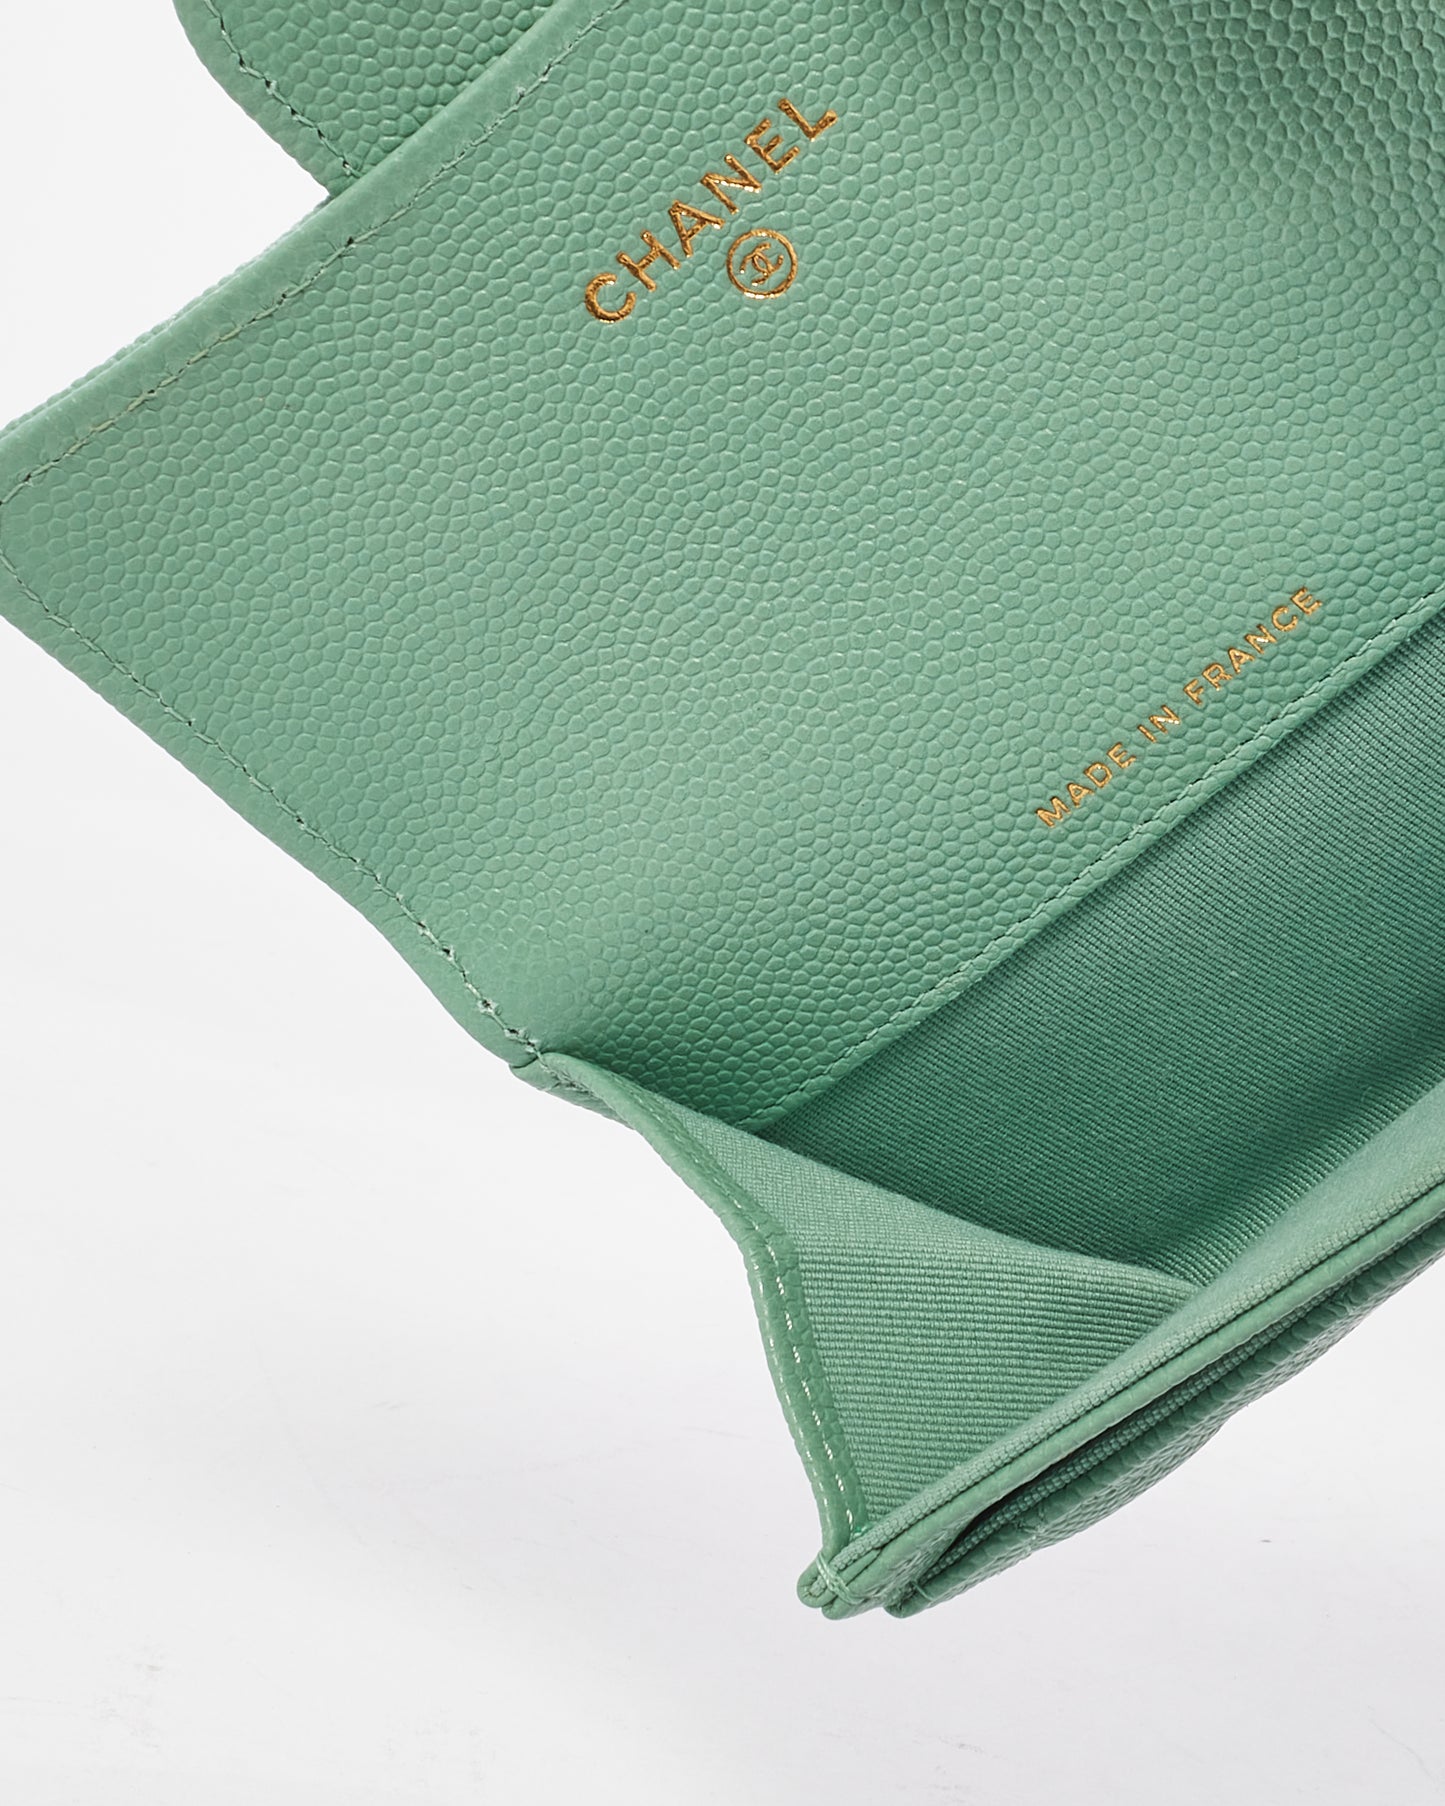 Chanel Mint Green Caviar Leather Flap Card Case